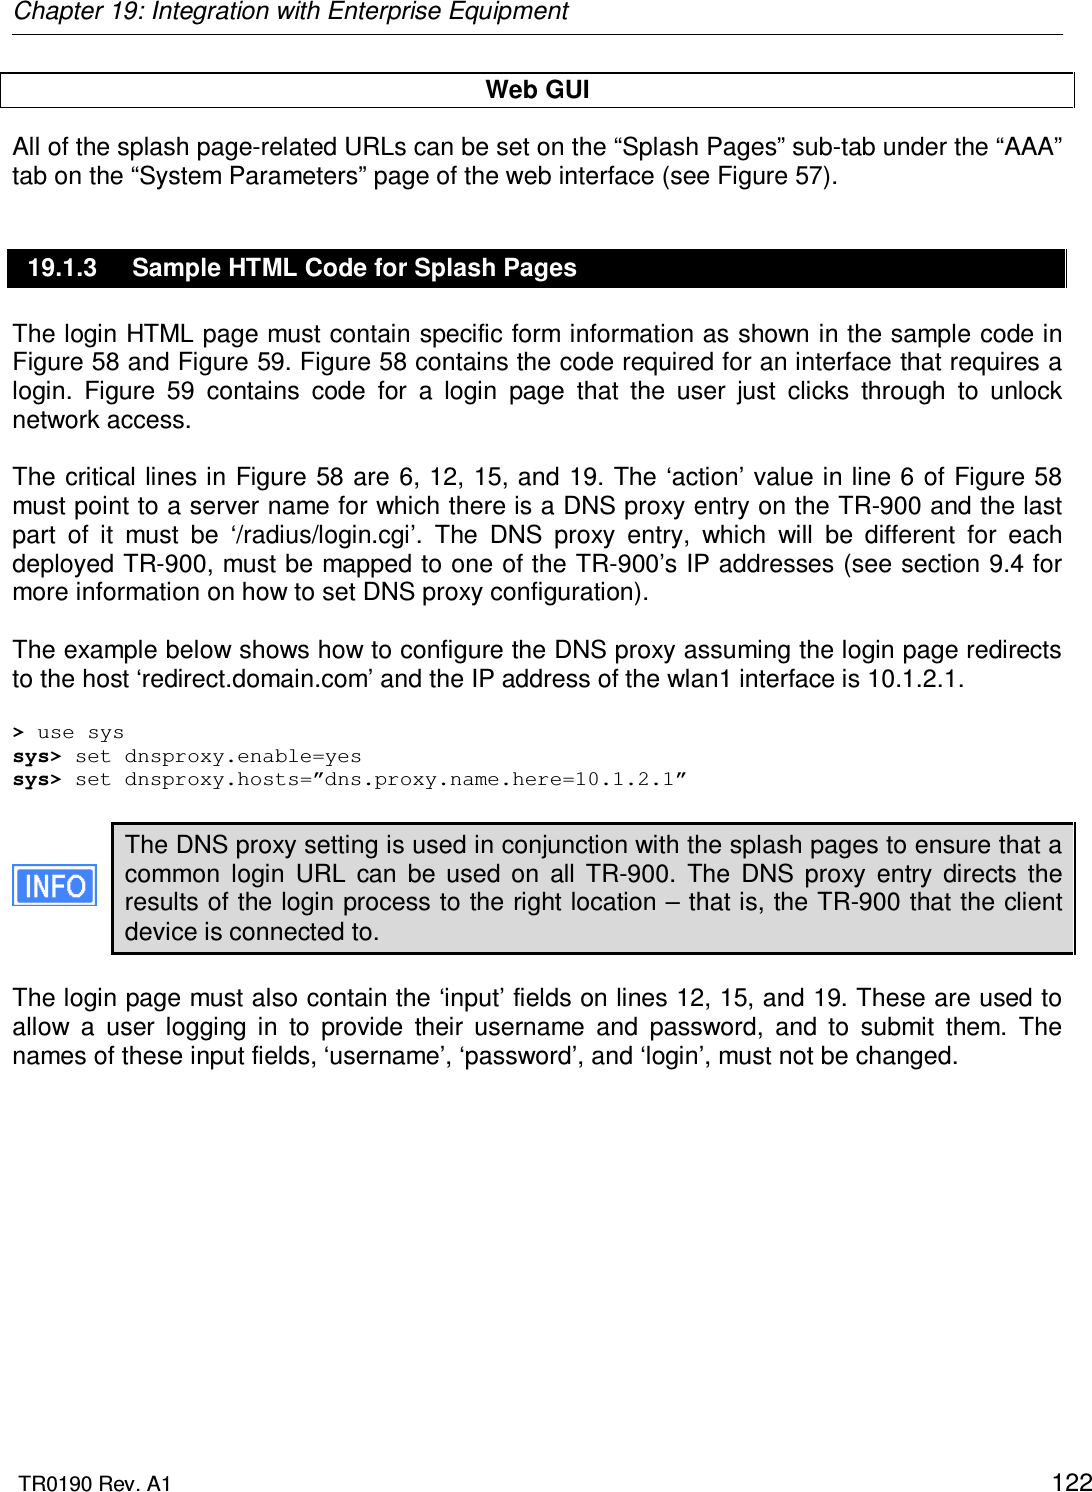 Chapter 19: Integration with Enterprise Equipment  TR0190 Rev. A1    122 Web GUI All of the splash page-related URLs can be set on the “Splash Pages” sub-tab under the “AAA” tab on the “System Parameters” page of the web interface (see Figure 57). 19.1.3  Sample HTML Code for Splash Pages The login HTML page must contain specific form information as shown in the sample code in Figure 58 and Figure 59. Figure 58 contains the code required for an interface that requires a login.  Figure  59  contains  code  for  a  login  page  that  the  user  just  clicks  through  to  unlock network access.   The critical lines in Figure 58 are 6, 12, 15, and 19. The ‘action’ value in line 6 of Figure 58 must point to a server name for which there is a DNS proxy entry on the TR-900 and the last part  of  it  must  be  ‘/radius/login.cgi’.  The  DNS  proxy  entry,  which  will  be  different  for  each deployed TR-900, must be mapped to one of the TR-900’s IP addresses (see section 9.4 for more information on how to set DNS proxy configuration).   The example below shows how to configure the DNS proxy assuming the login page redirects to the host ‘redirect.domain.com’ and the IP address of the wlan1 interface is 10.1.2.1.  &gt; use sys sys&gt; set dnsproxy.enable=yes sys&gt; set dnsproxy.hosts=”dns.proxy.name.here=10.1.2.1”  The DNS proxy setting is used in conjunction with the splash pages to ensure that a common  login  URL  can  be  used  on  all  TR-900.  The  DNS  proxy  entry  directs  the results of the login process to the right location – that is, the TR-900 that the client device is connected to.  The login page must also contain the ‘input’ fields on lines 12, 15, and 19. These are used to allow  a  user  logging  in  to  provide  their  username  and  password,  and  to  submit  them.  The names of these input fields, ‘username’, ‘password’, and ‘login’, must not be changed.   